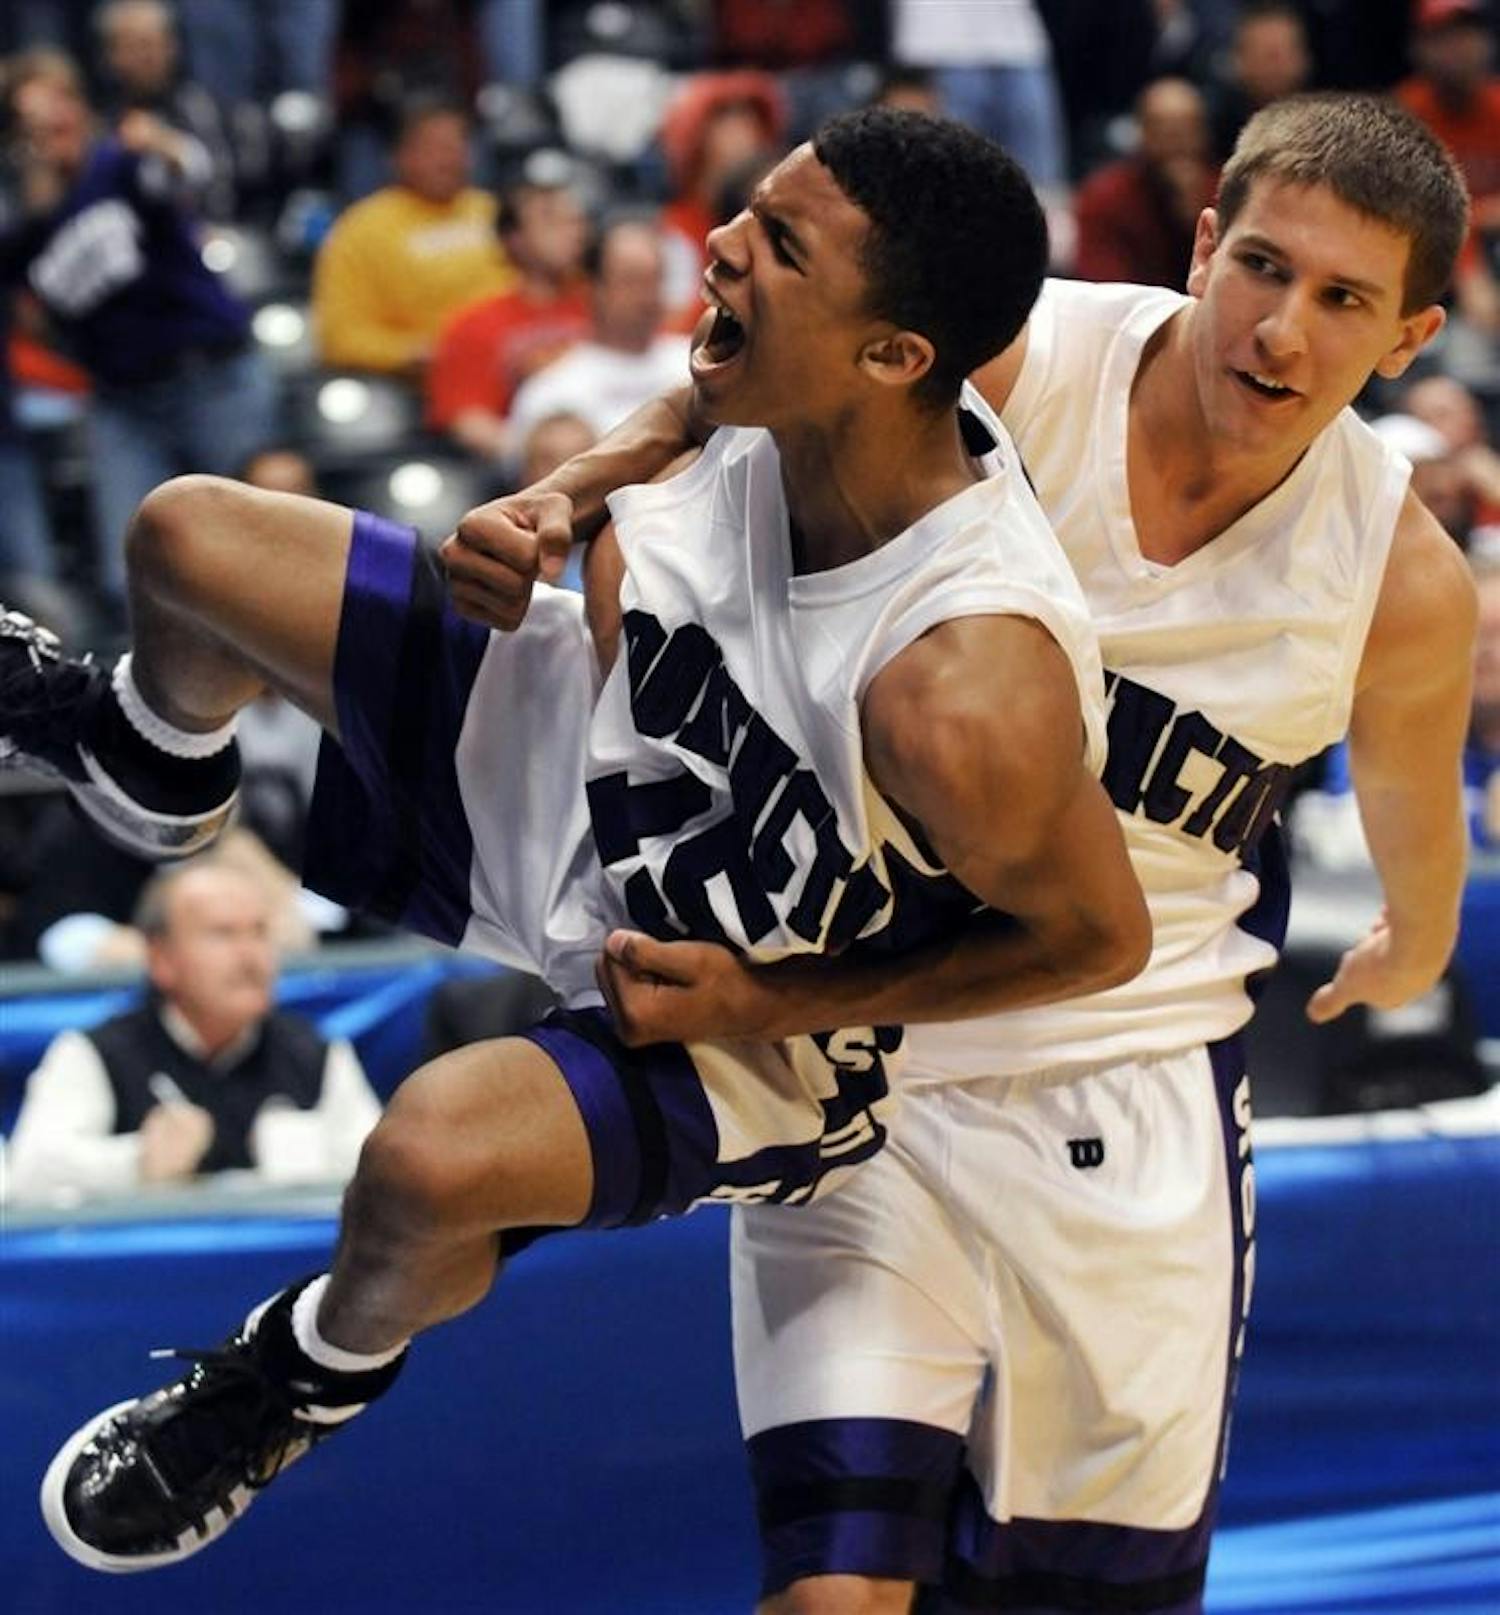 Bloomington South's Jacob Mulinix, right, grabs teammate Darwin Davis Jr. after they defeated Fort Wayne Snider 69-62 in the IHSAA Class 4A boys basketball state finals at Conseco FieldhouseSaturday in Indianapolis. (AP Photo/Tom Strickland)